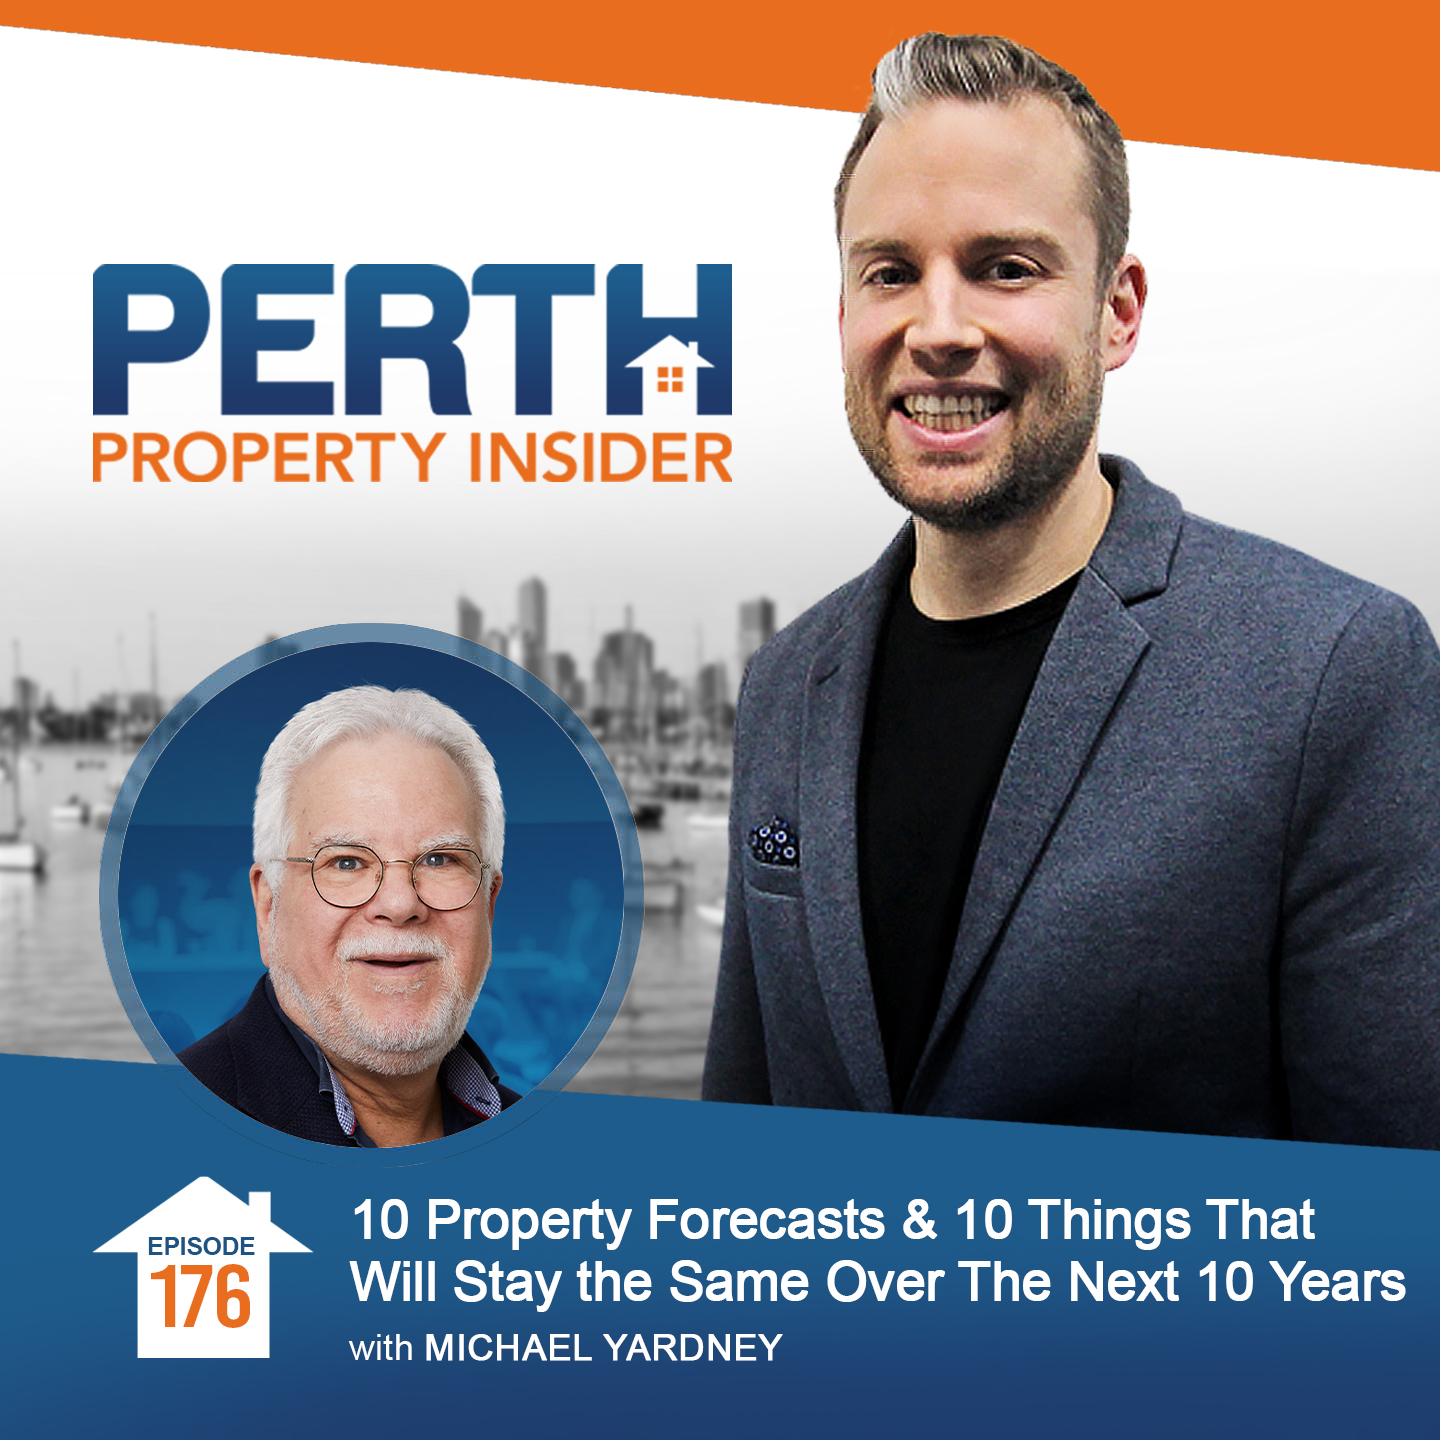 10 Property Forecasts & 10 Things That Will Stay the Same Over The Next 10 Years With Michael Yardney